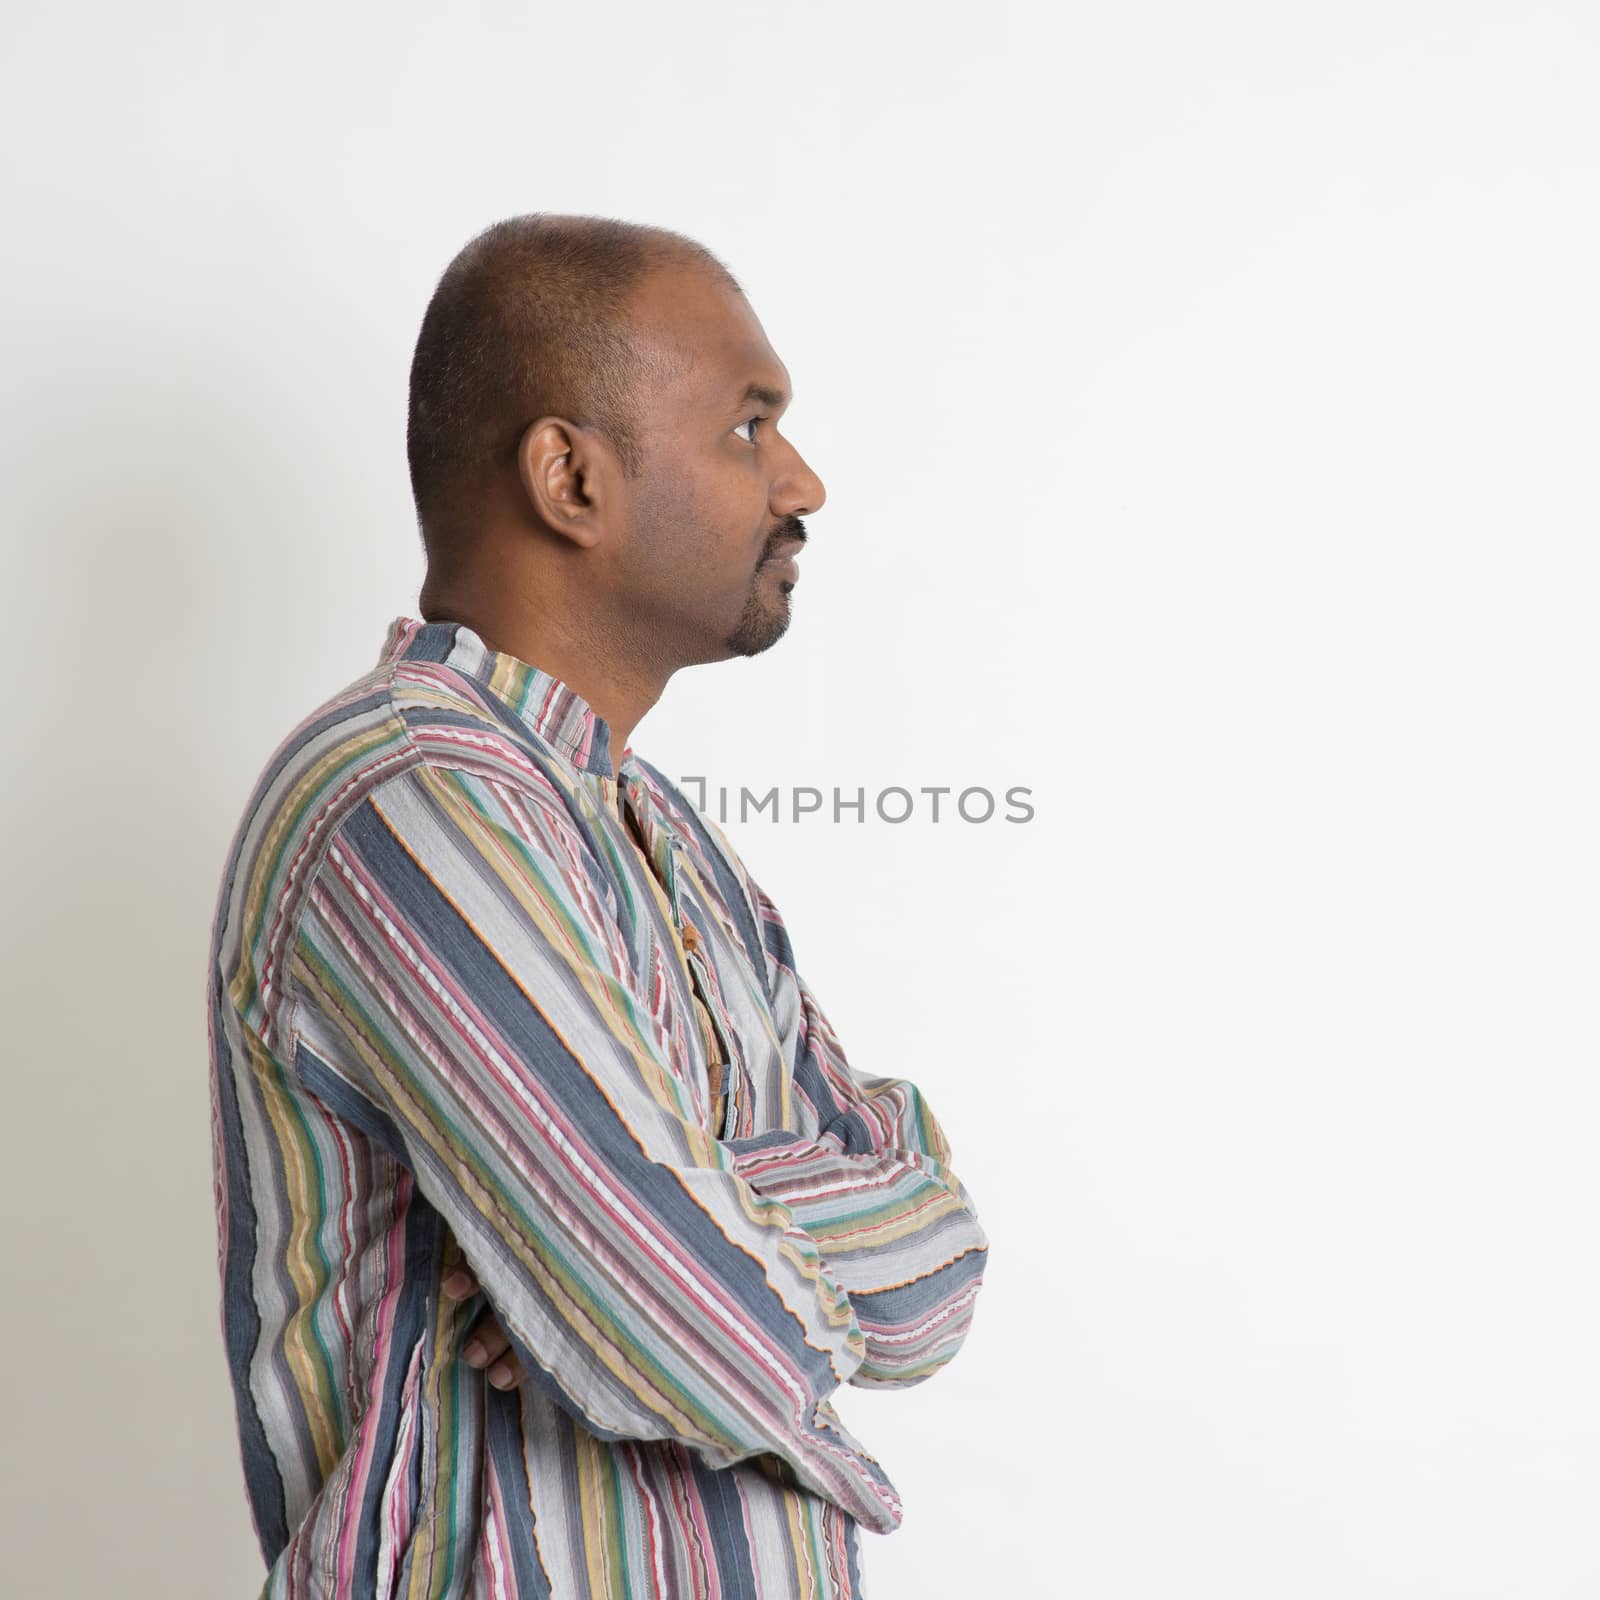 Profile of Indian male looking at blank copy space having a thought on plain background.